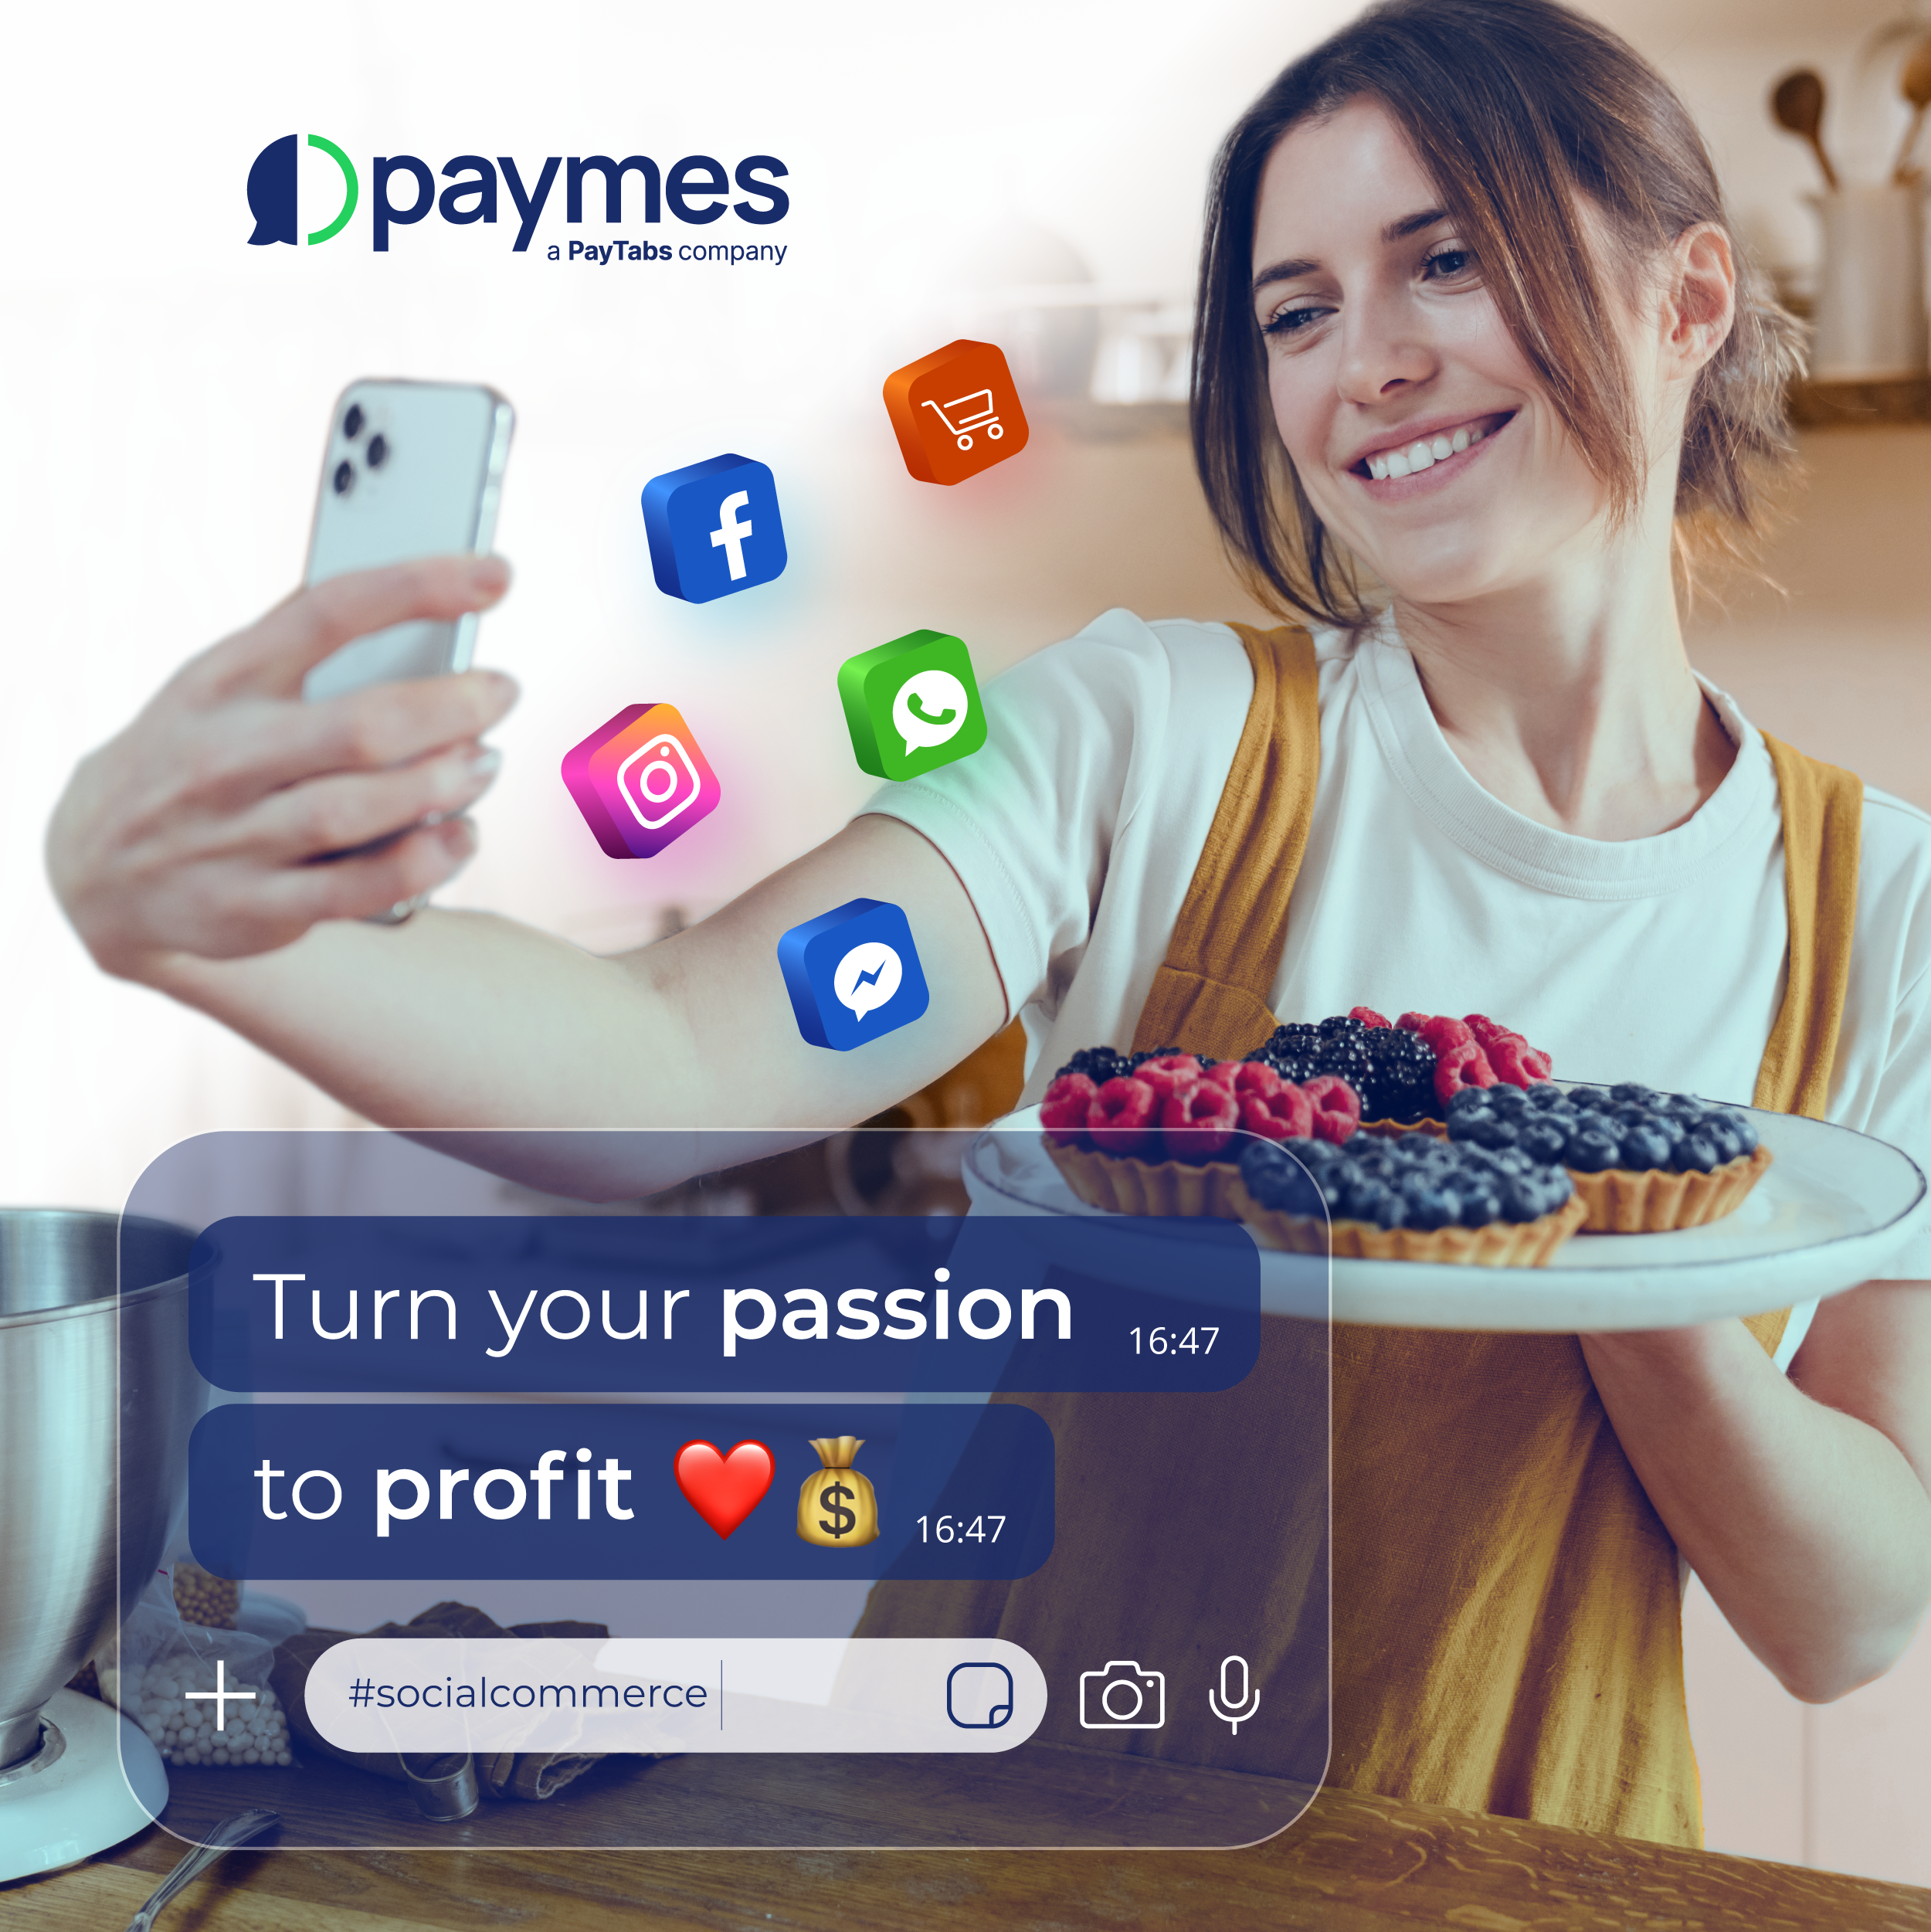 Top 10 Paymes Platform Benifits for Small Businesses & Freelancers